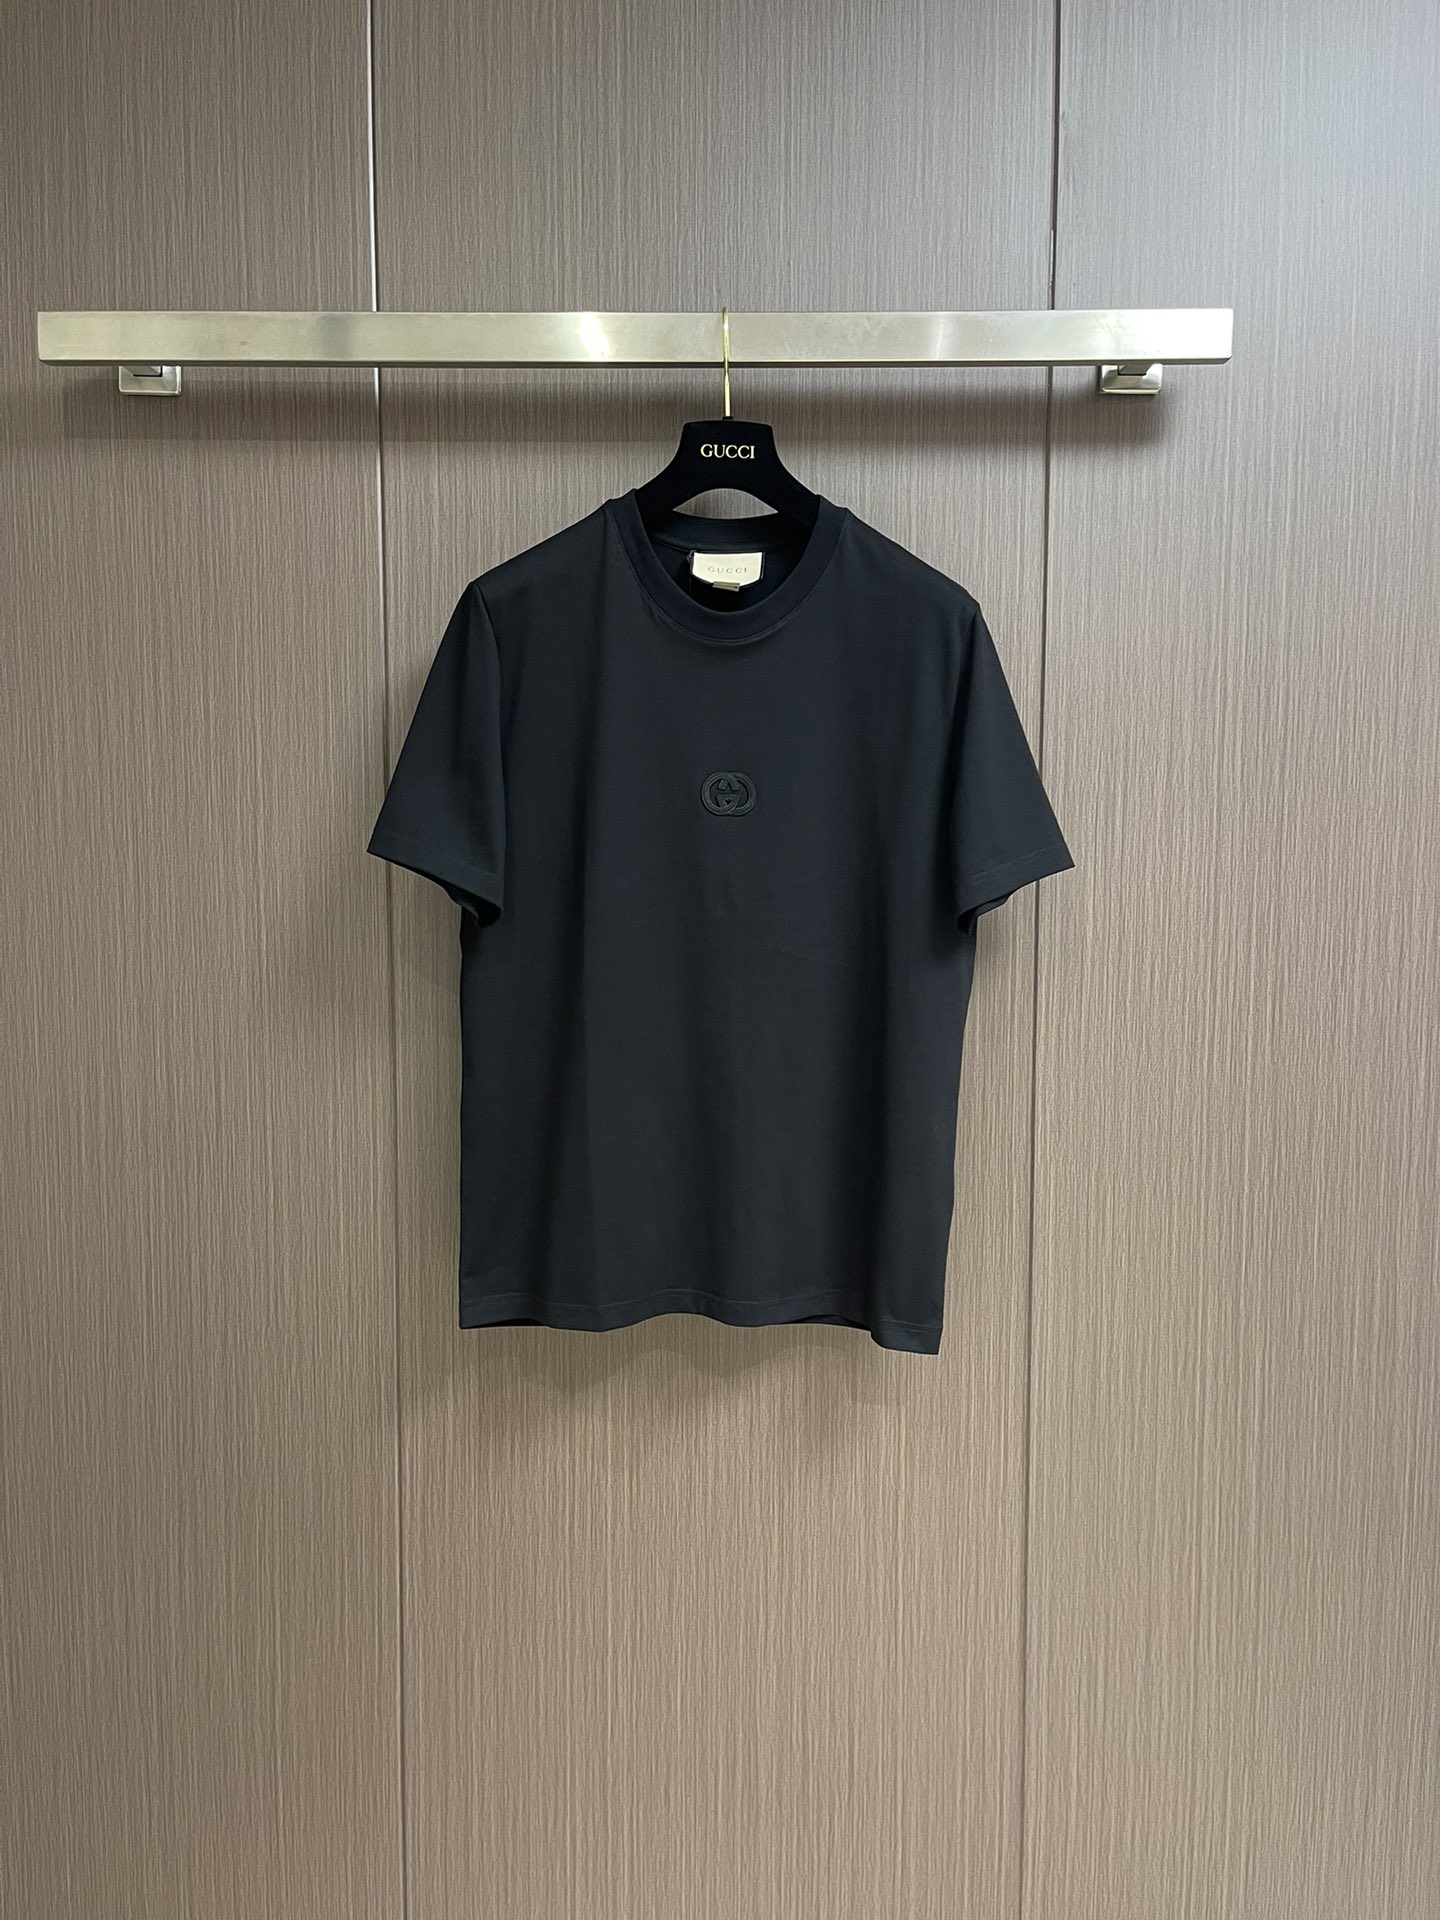 1:1 Replica
 Gucci Clothing T-Shirt Cheap Embroidery Combed Cotton Fabric Short Sleeve